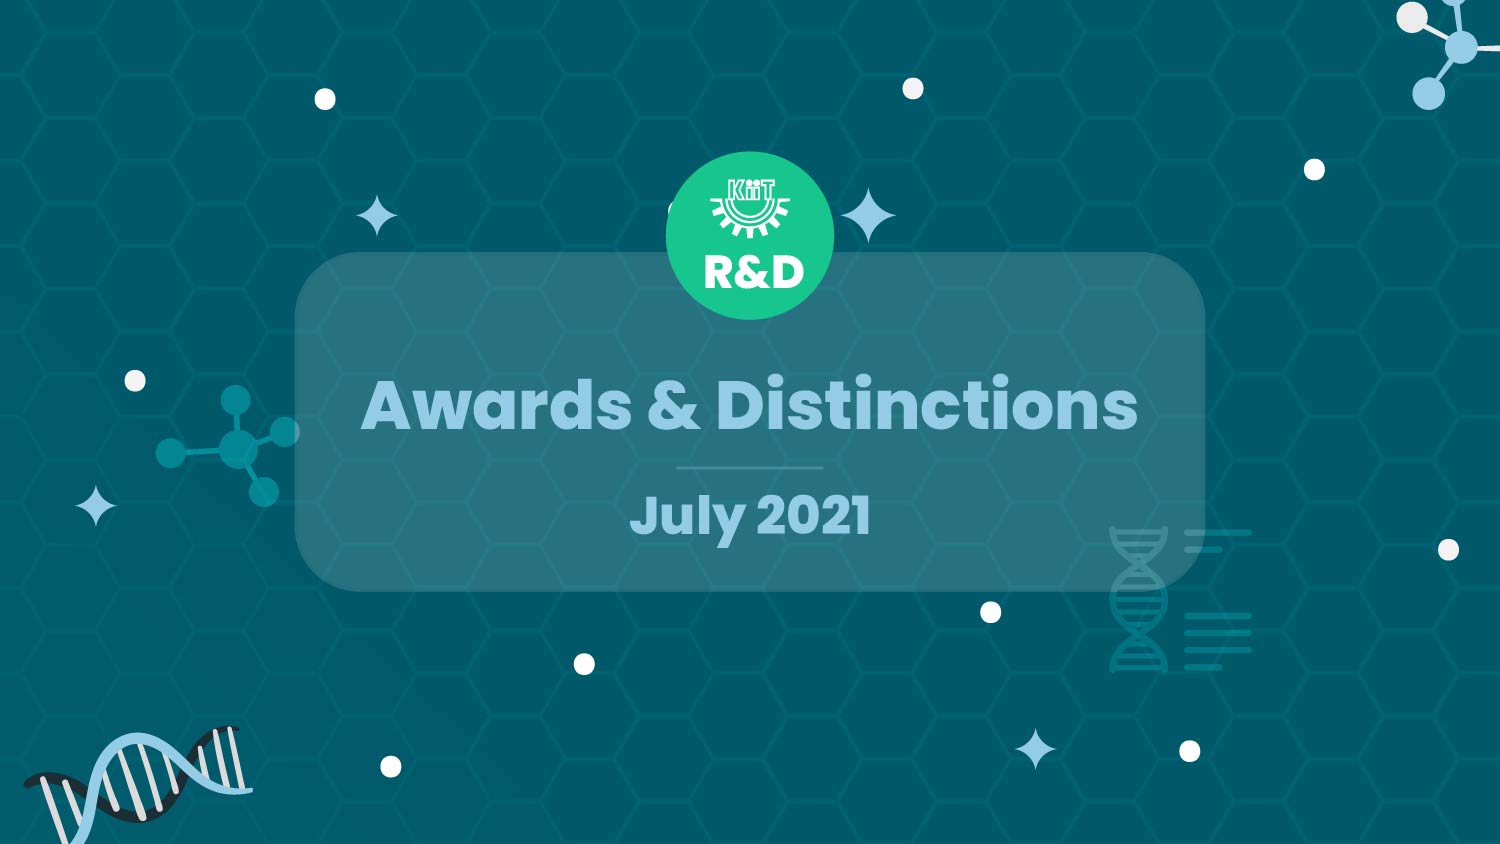 KIIT R&D Research and Development-Awards & Distinctions